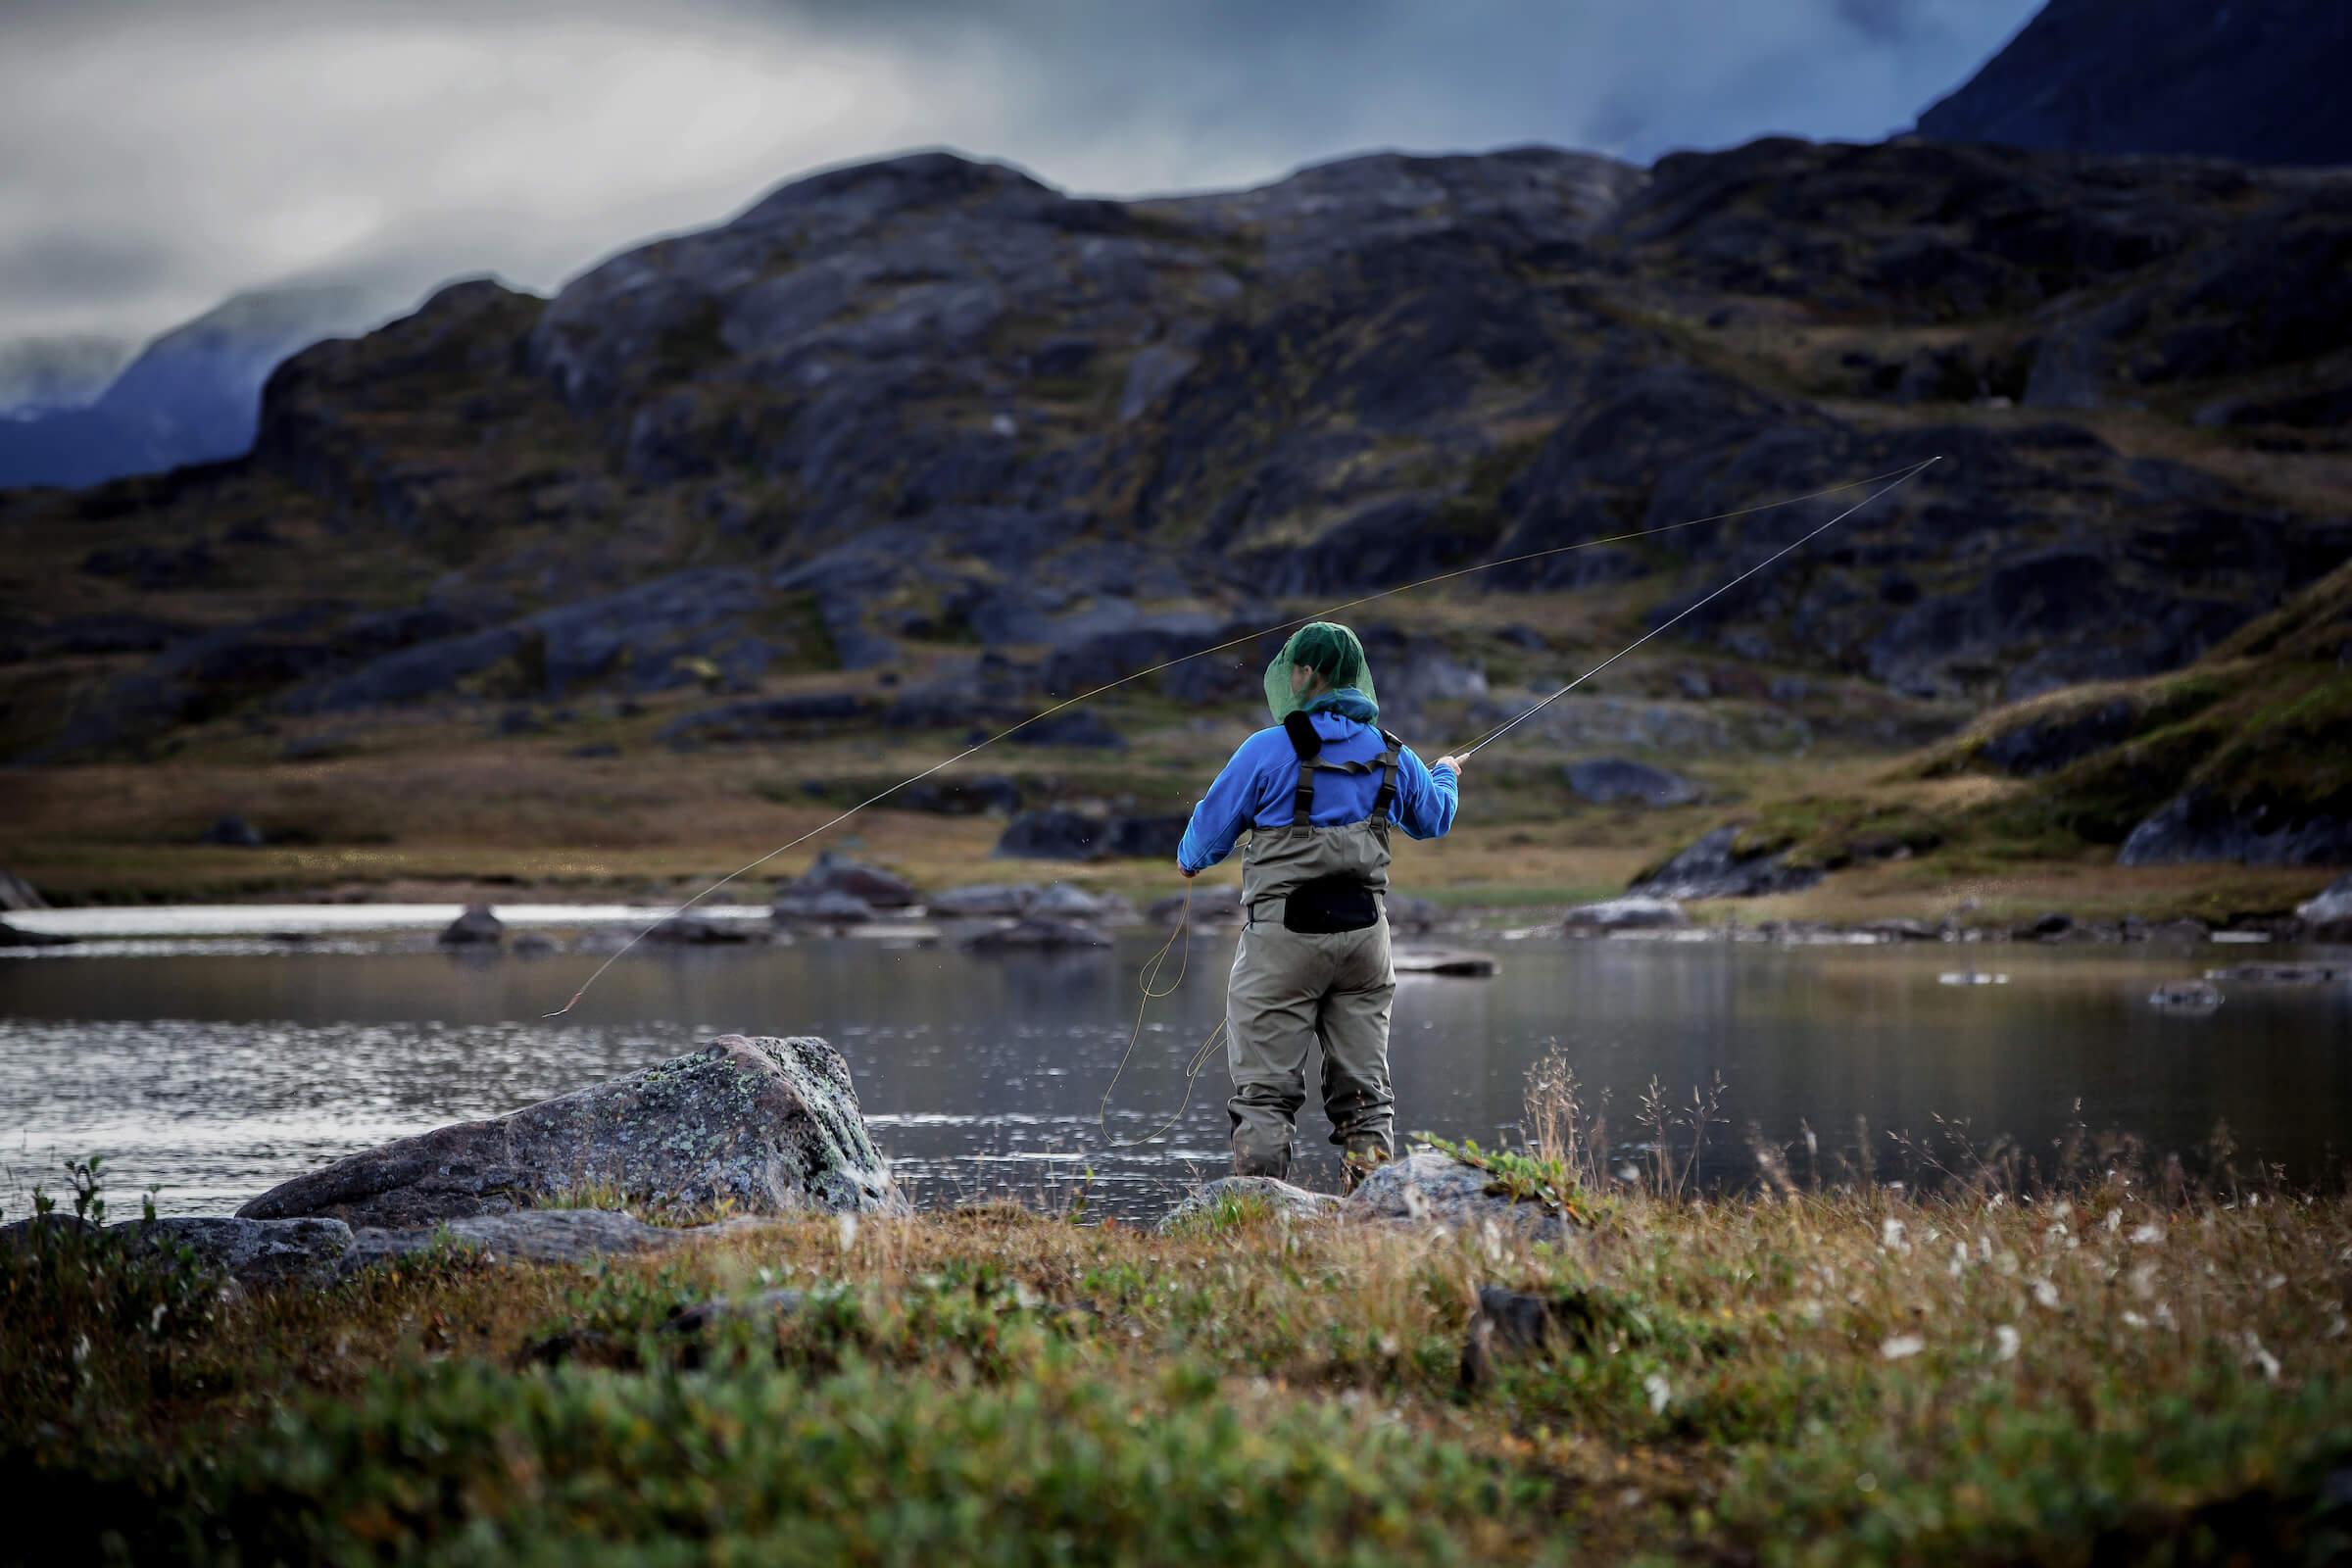 Fly fishing on Erfalik river in Destination Arctic Circle in West Greenland. By Mads Pihl